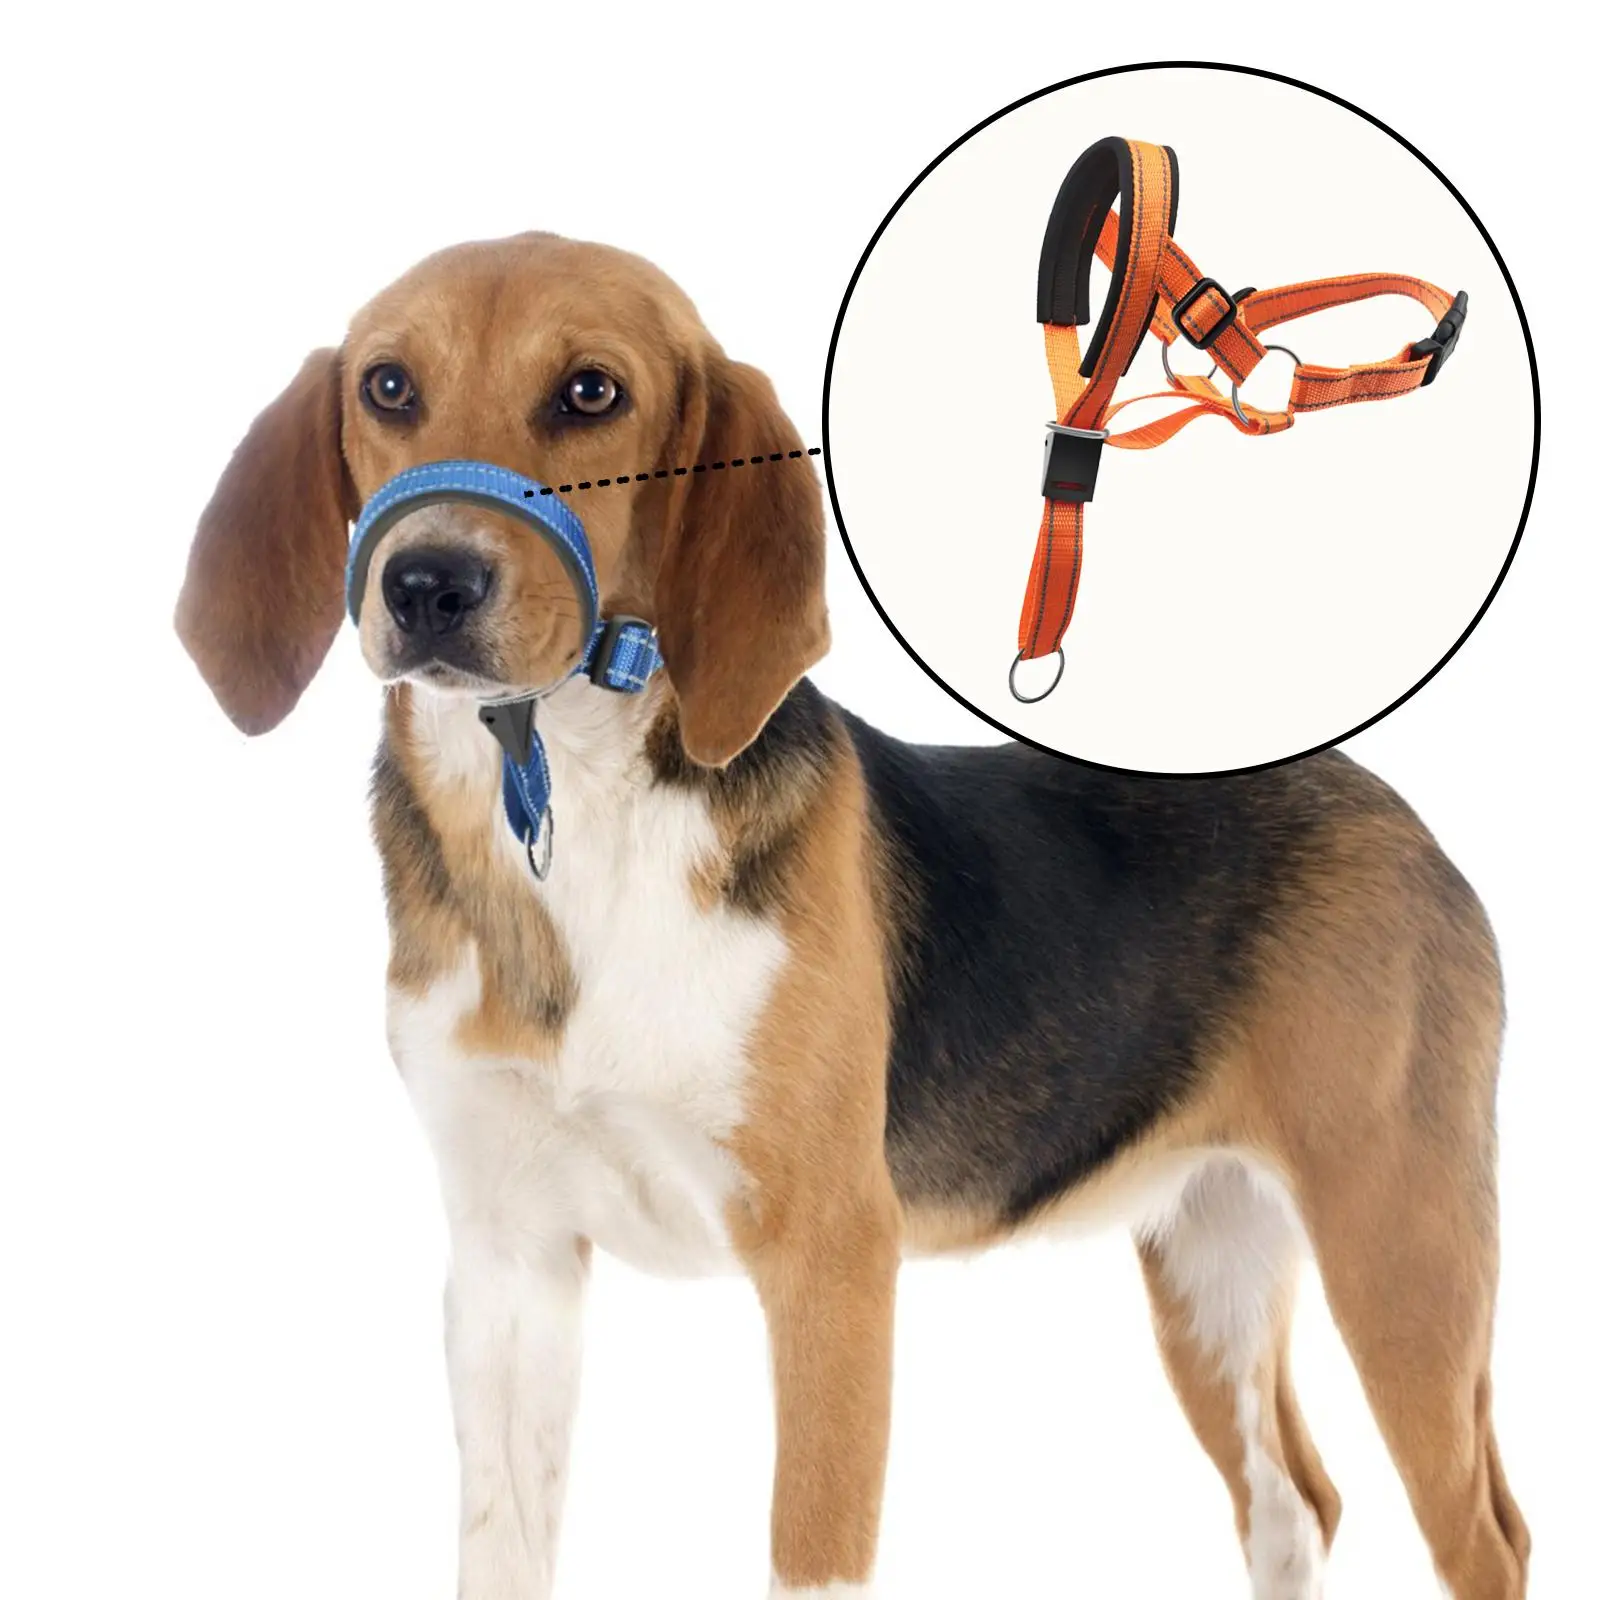 Nylon Dog Mouth Cover with Hook Adjustable Pet Muzzle Drinkable Dogs Muzzle for Aggressive Dogs Traveling Outdoor Walking Animal